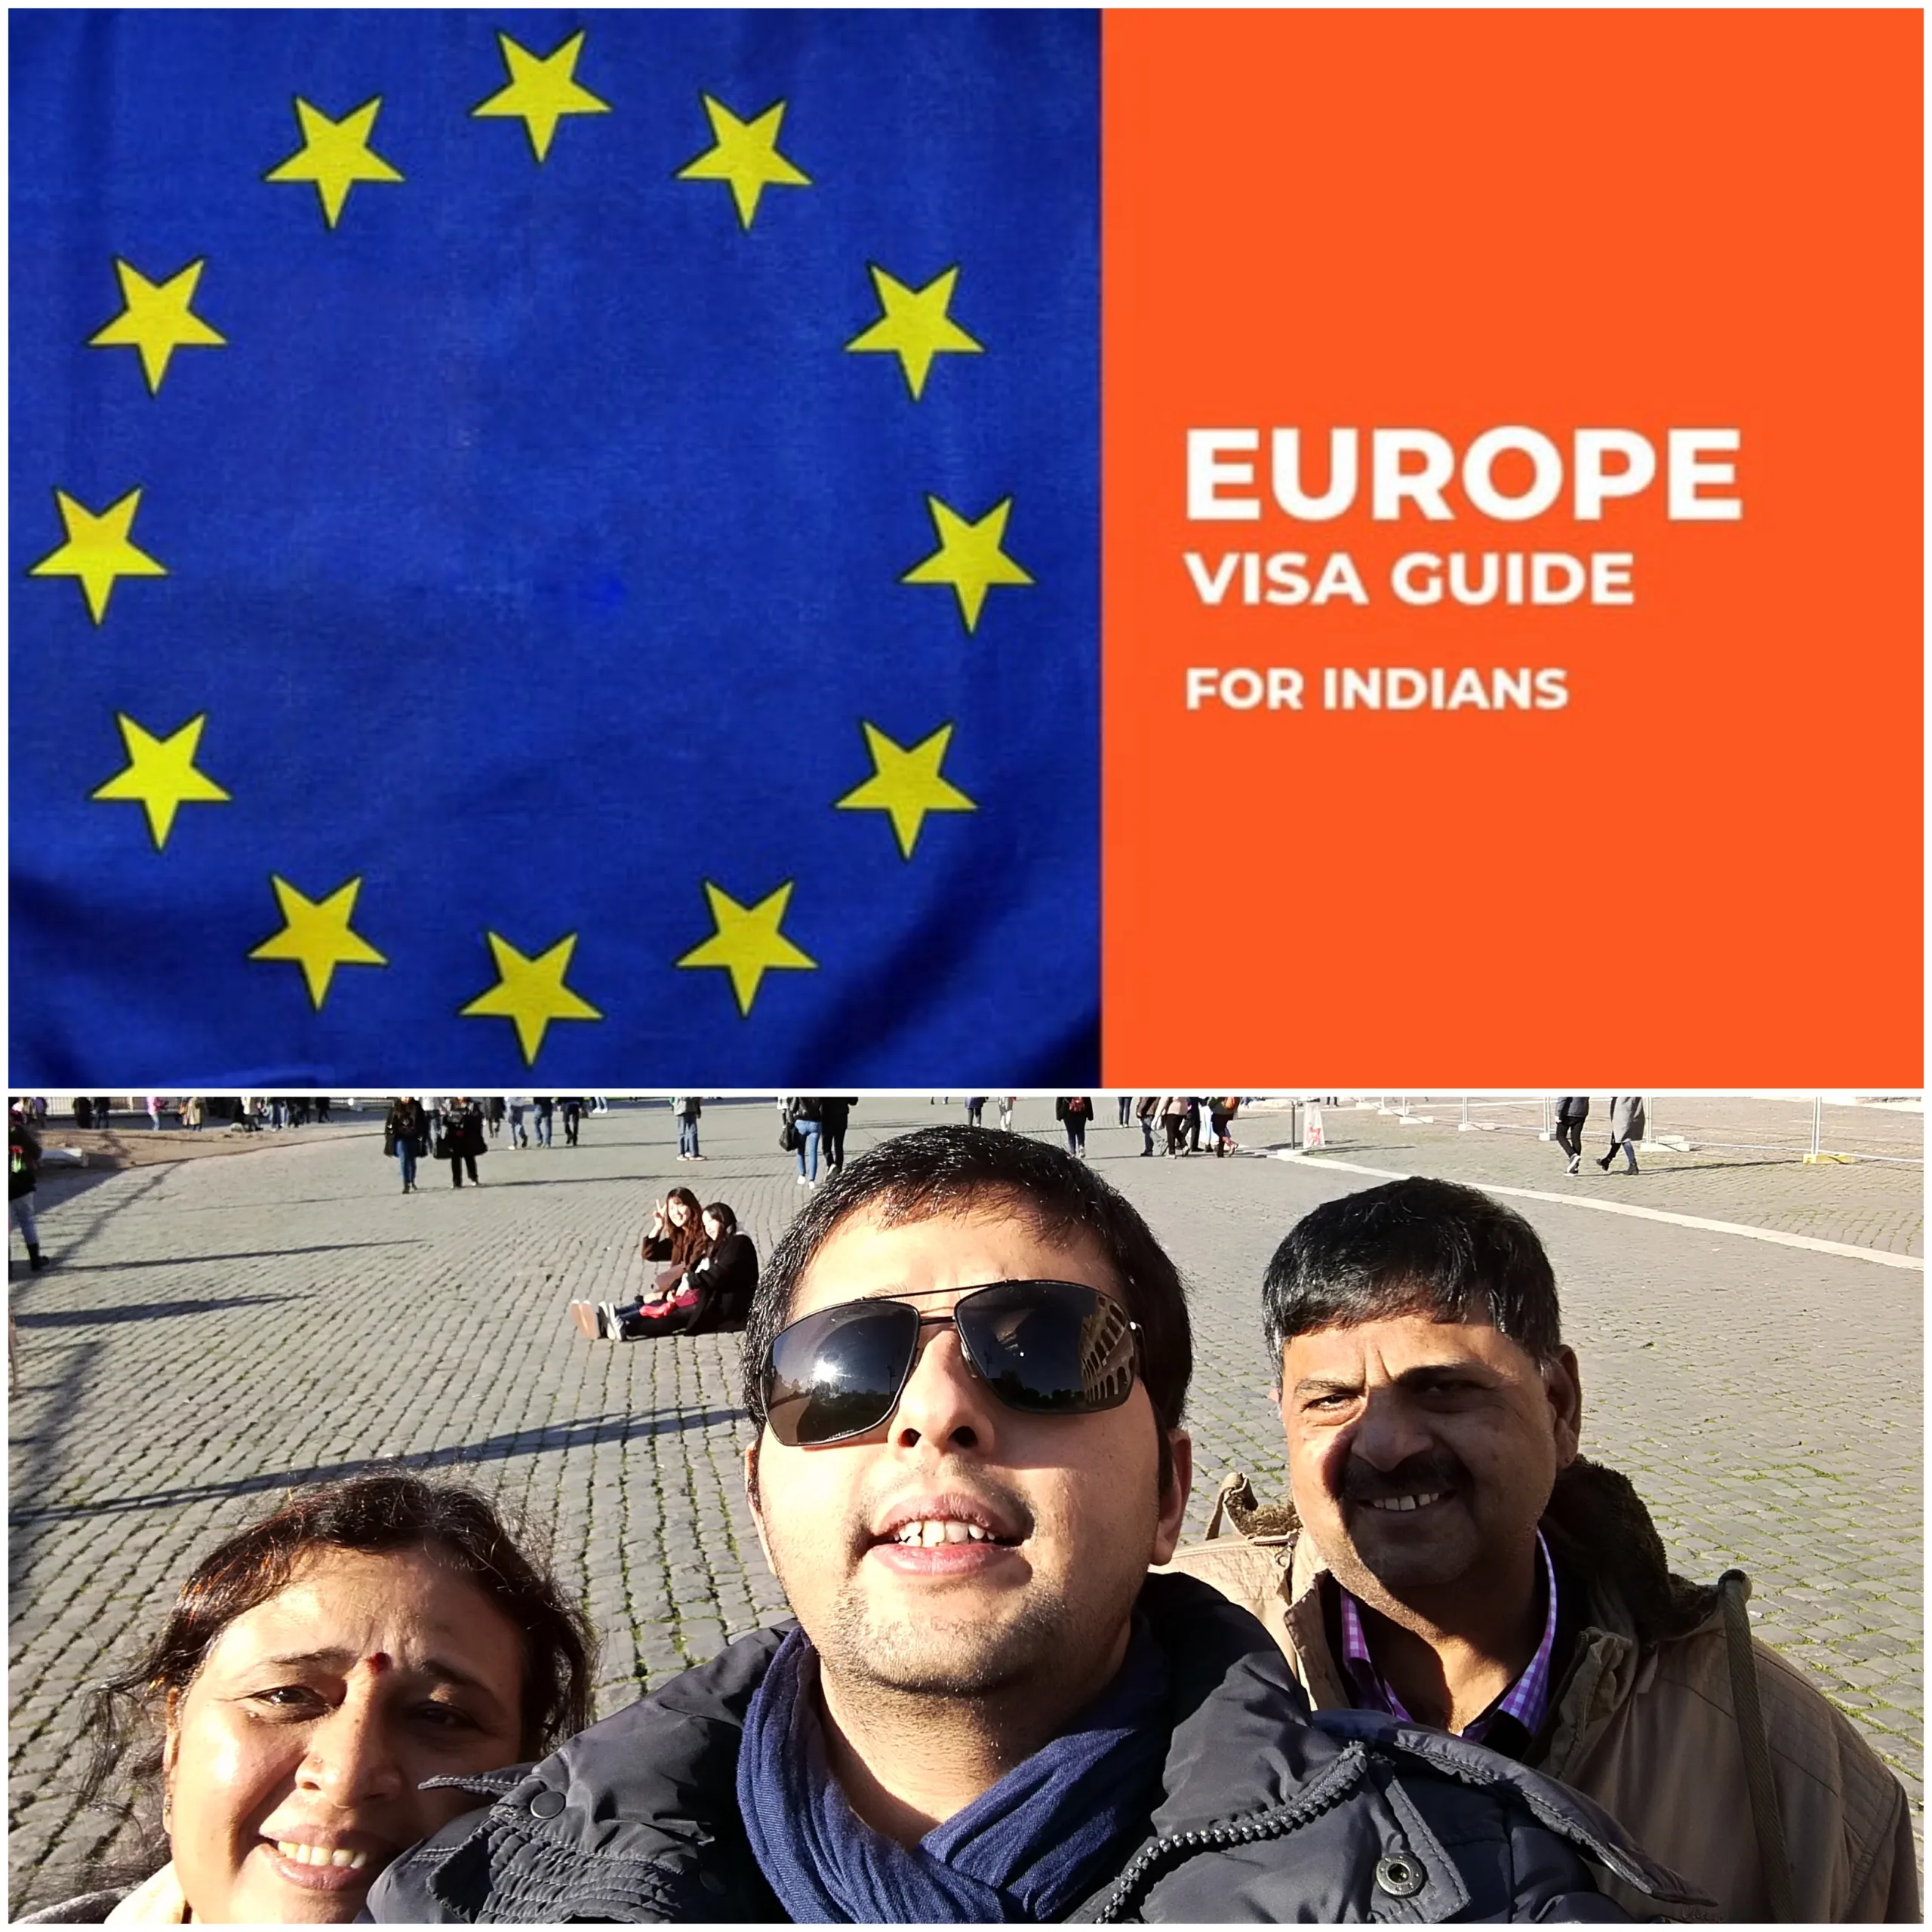 Do Indian citizens need visa for Europe?